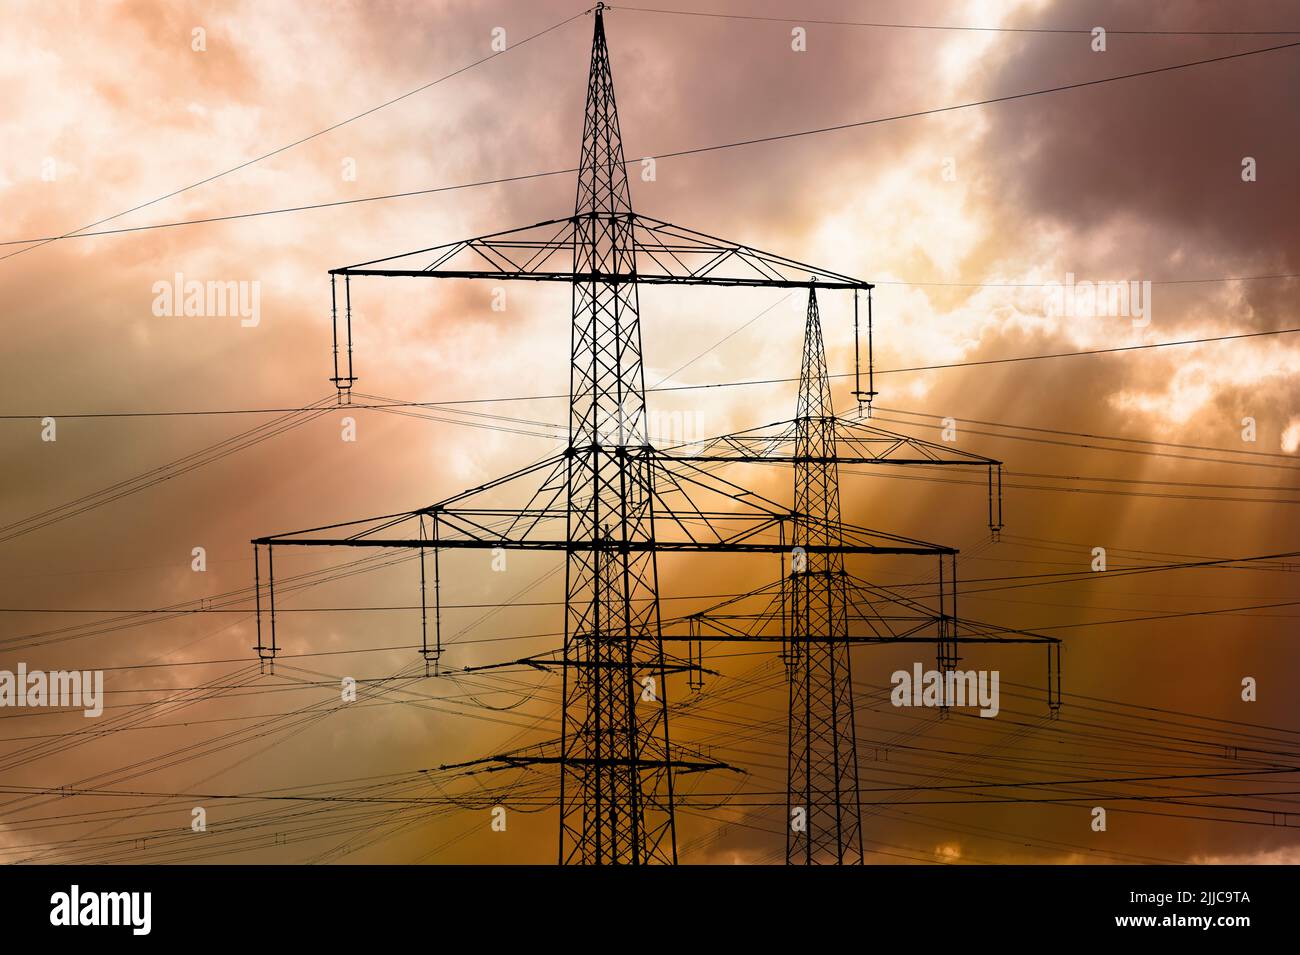 Many elecrtic poles in front of sky with clouds Stock Photo